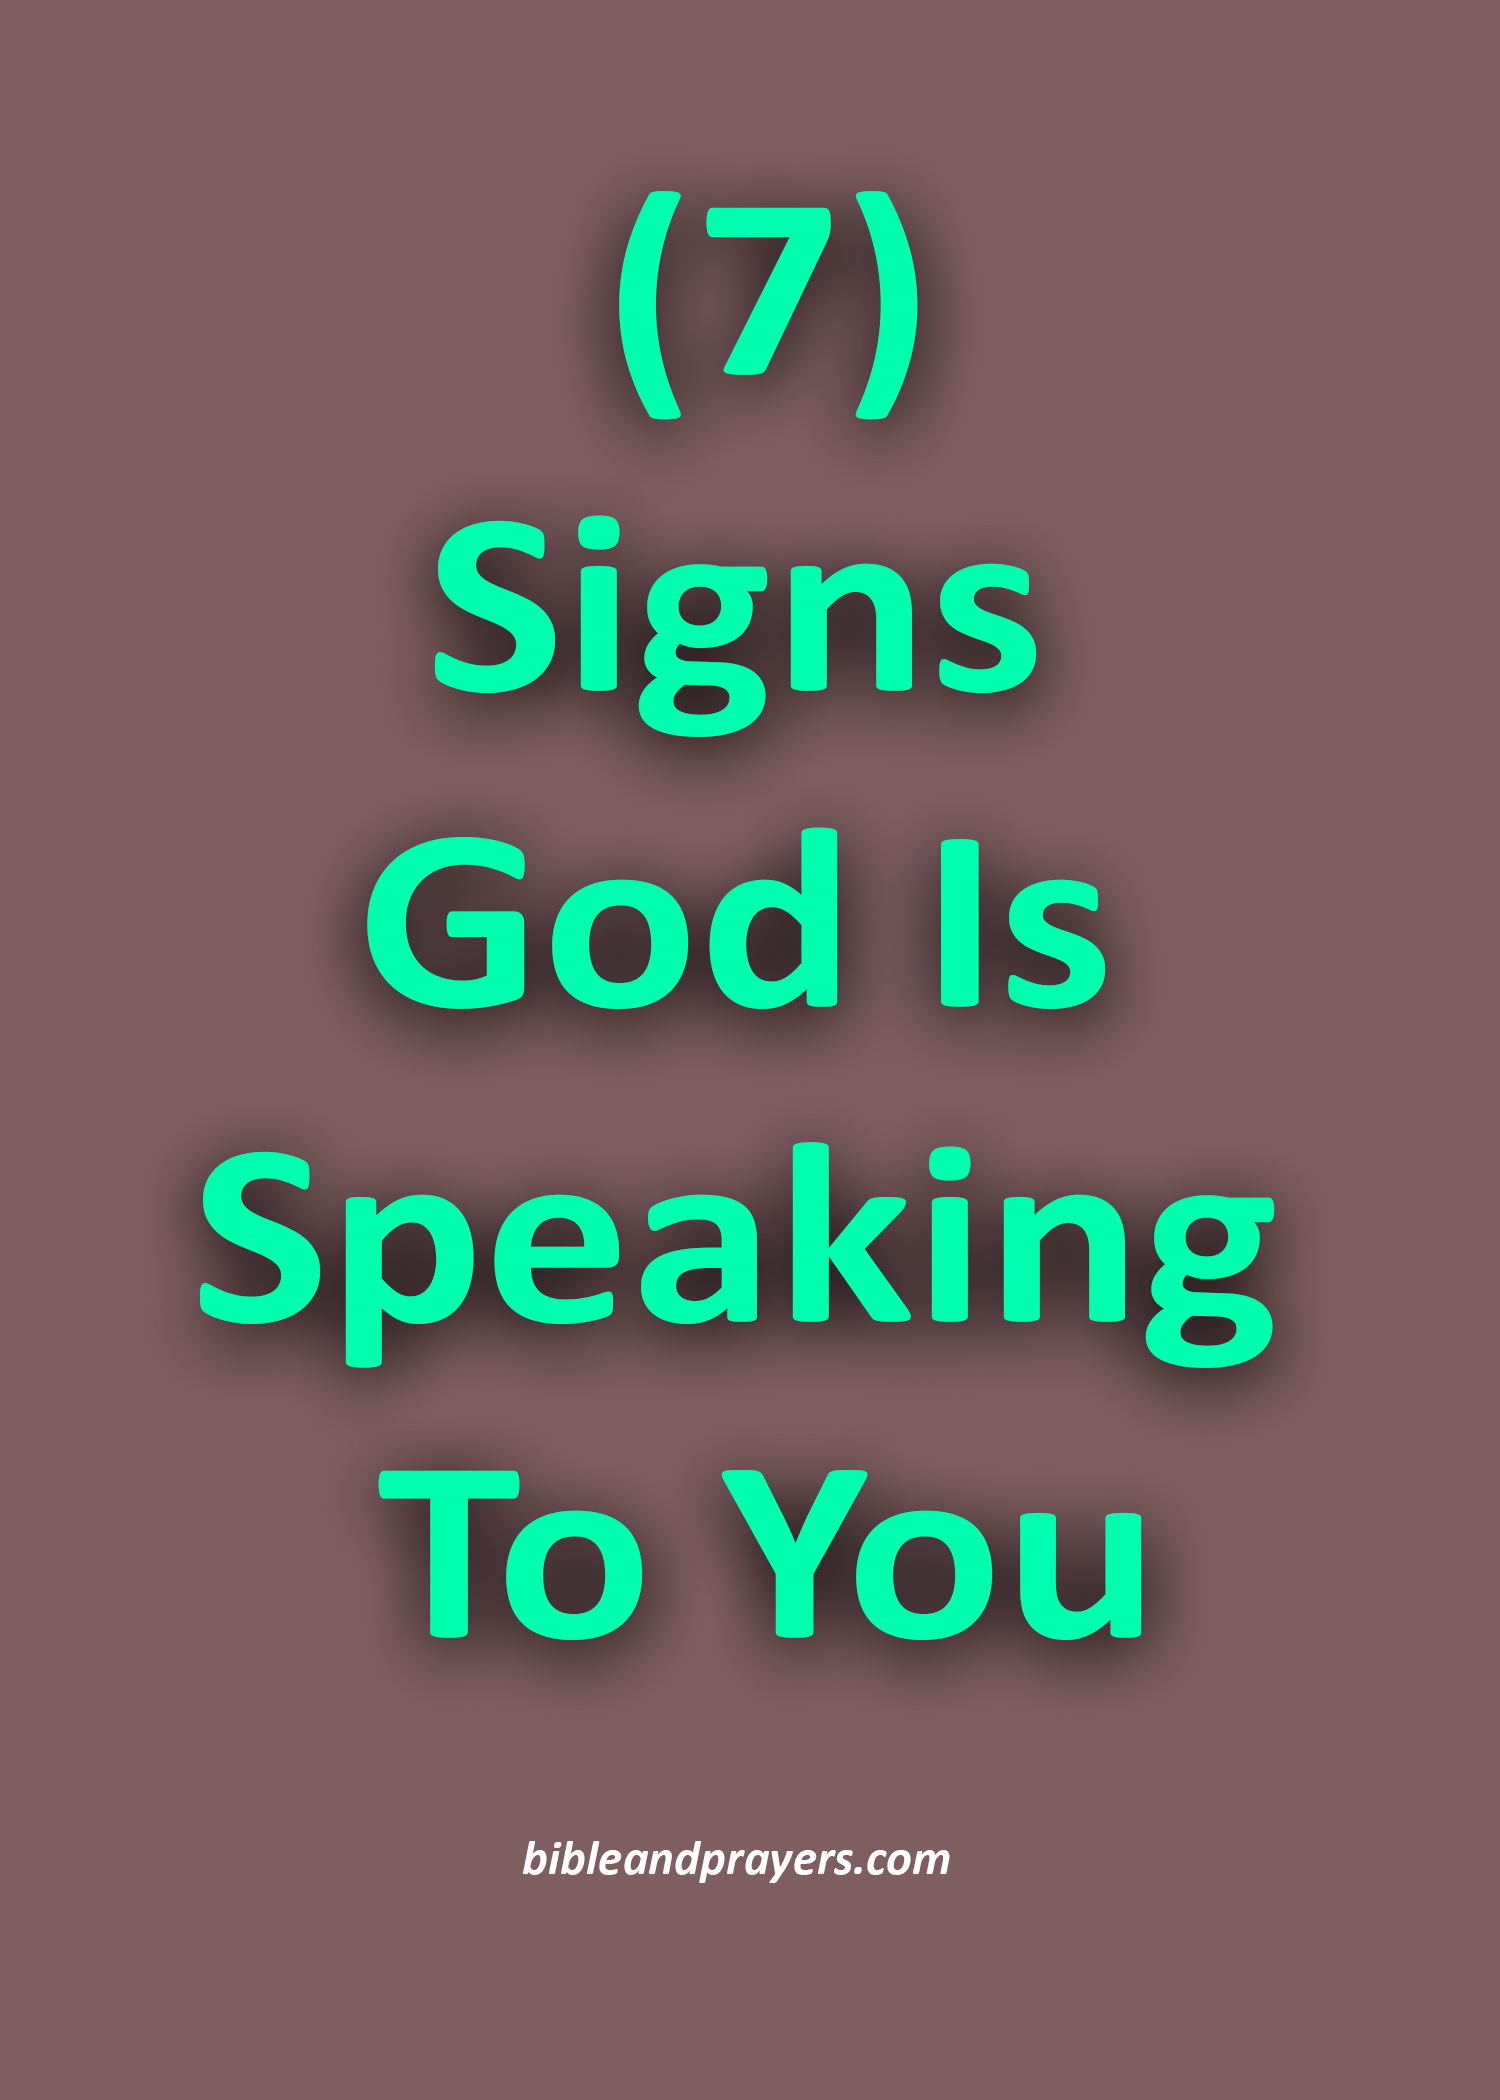 7 Signs God Is Speaking To You